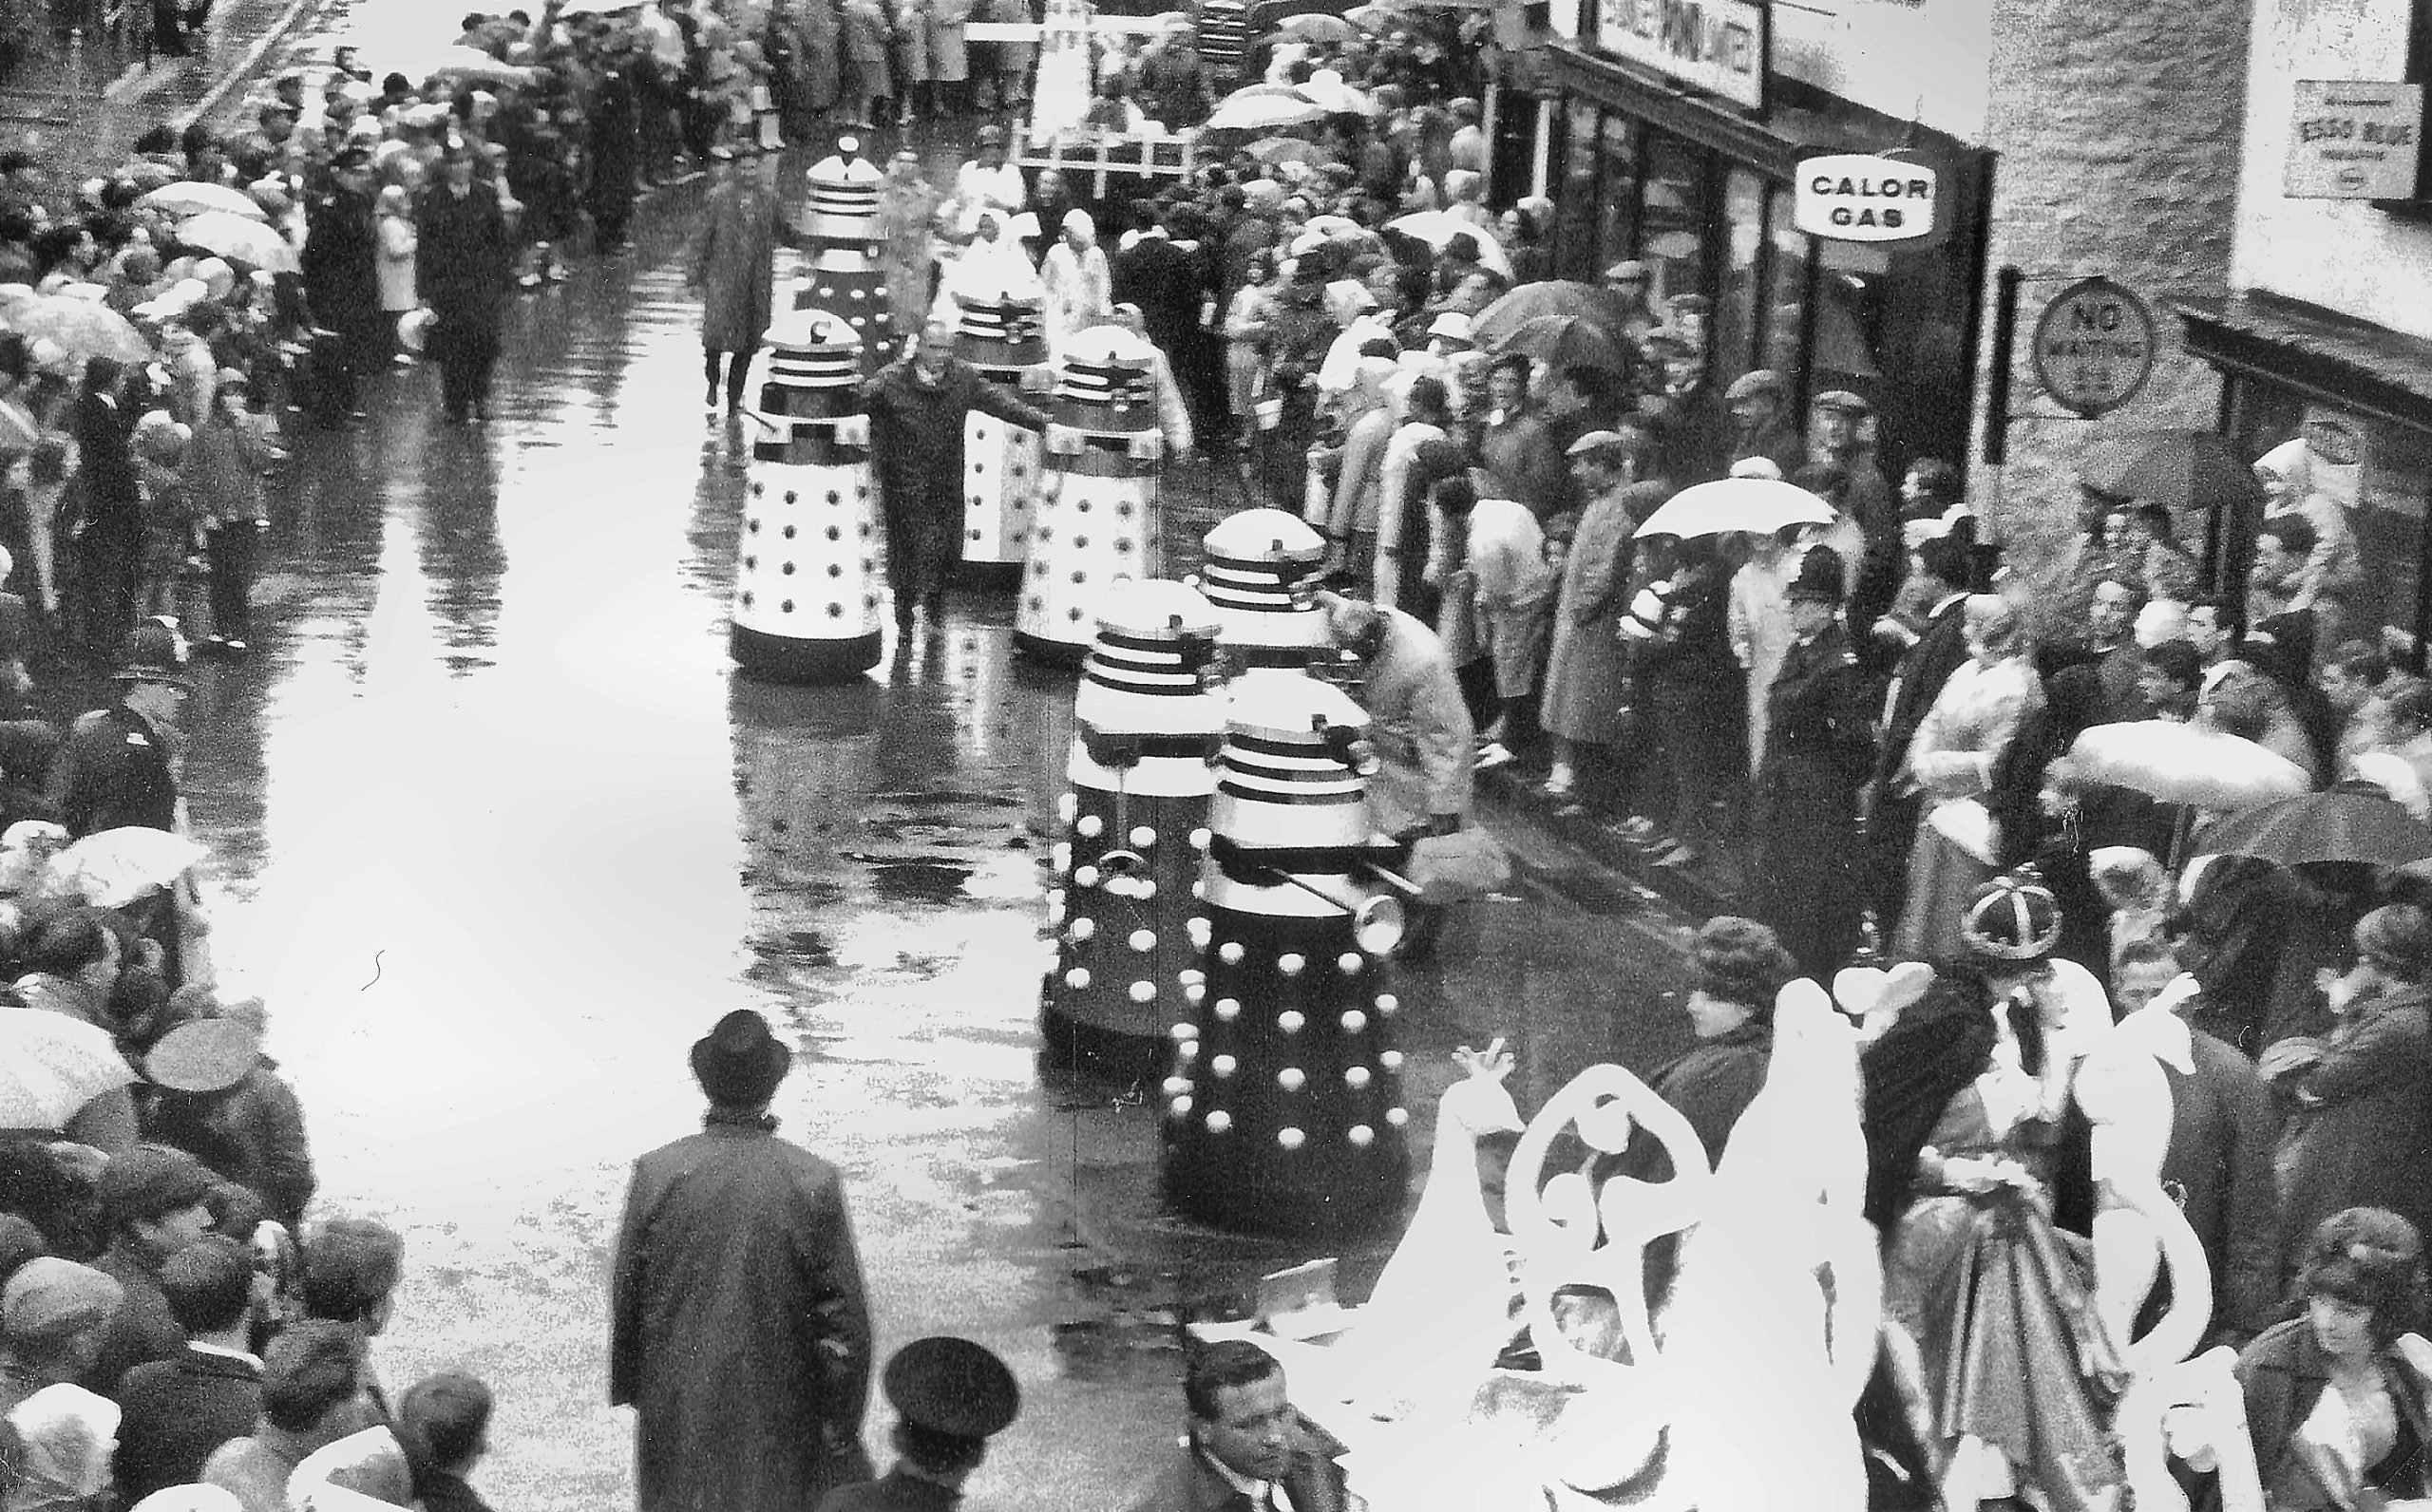 Glimpse A wet Carnival procession in 1965 when the Daleks, set on world domination, needed some human help.